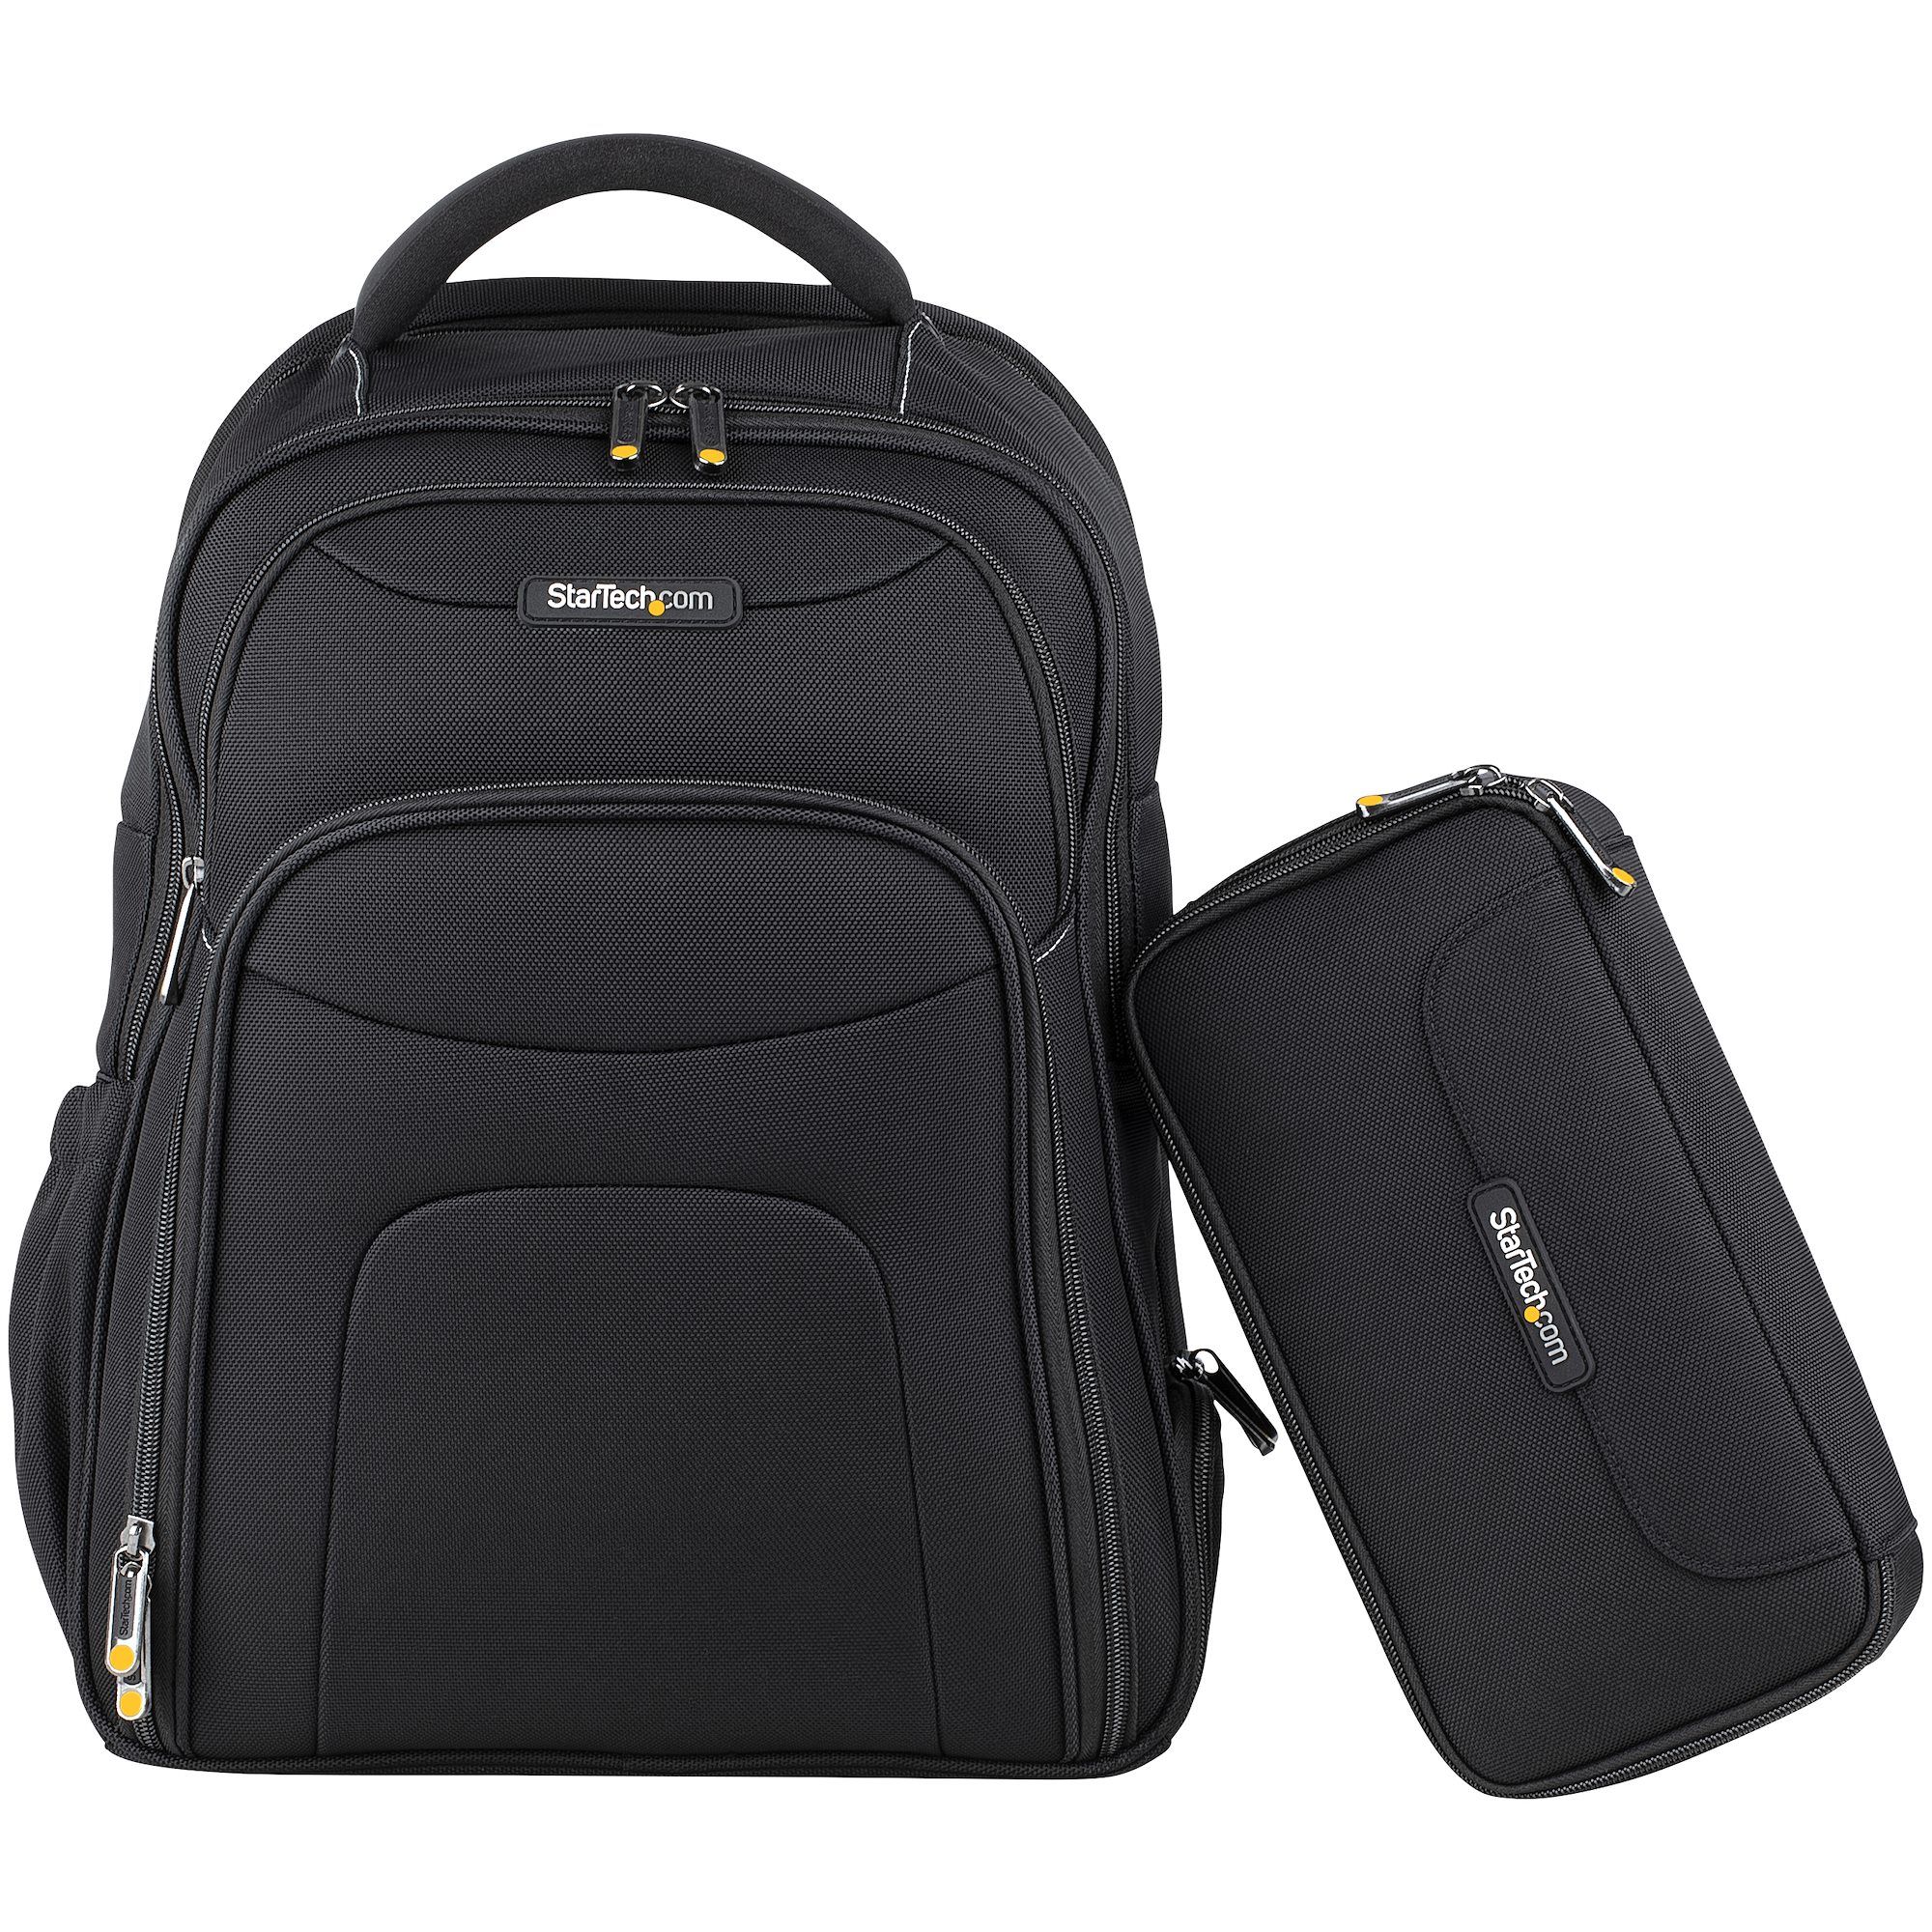 15.6in Laptop Backpack w/ Accessory Case - Laptop Backpacks | Canada